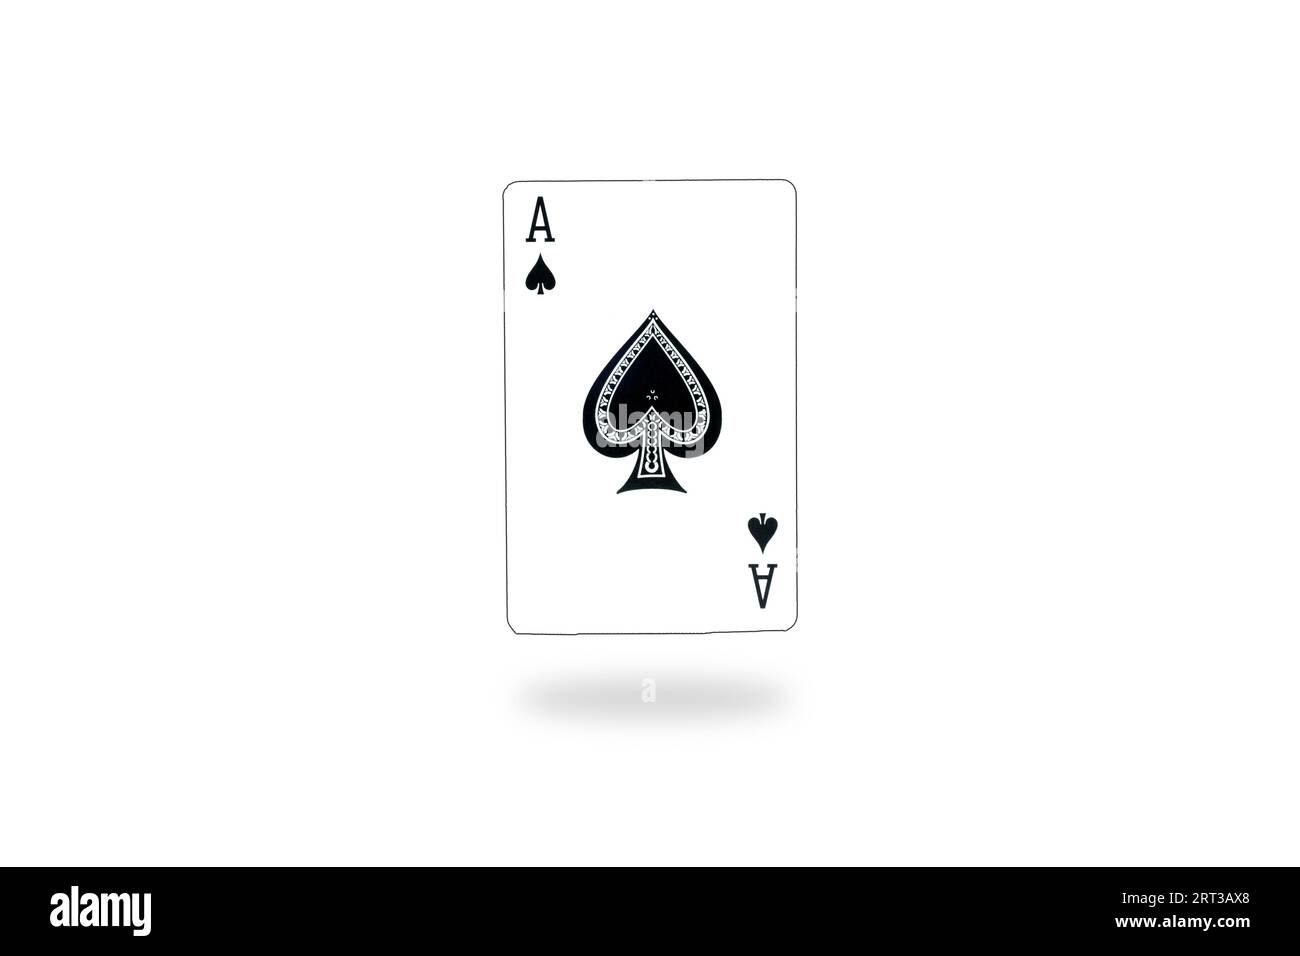 Spade ace playing card in the plain white background Stock Photo